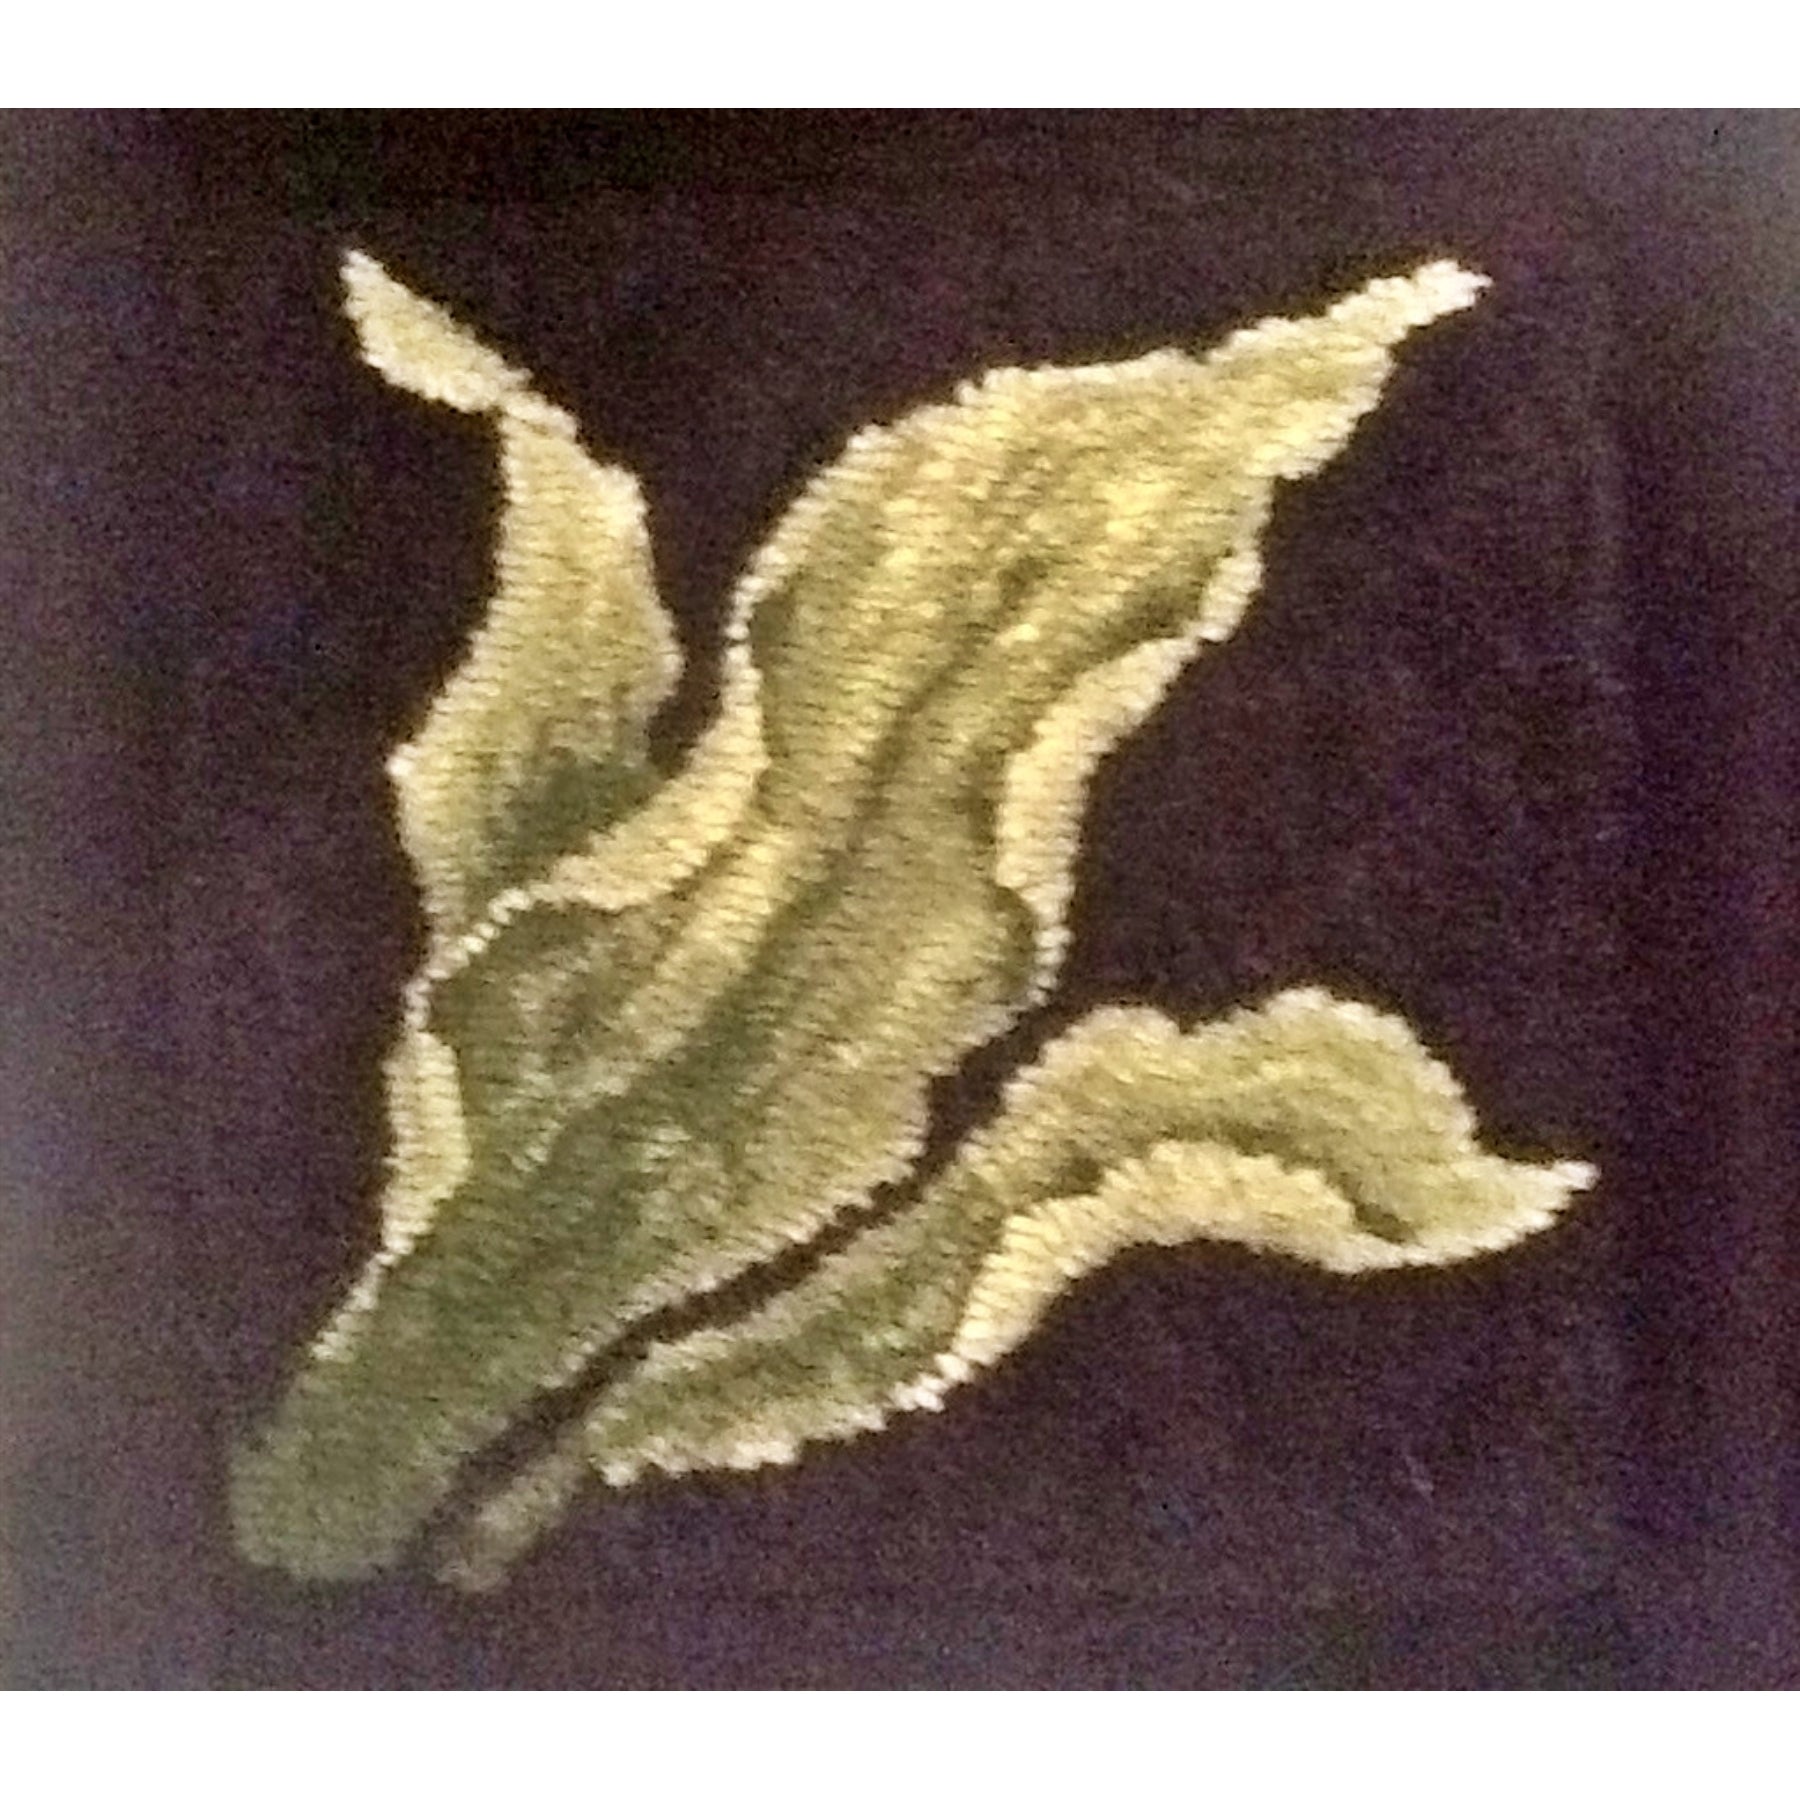 Leaves, rug hooked by Martha Beals